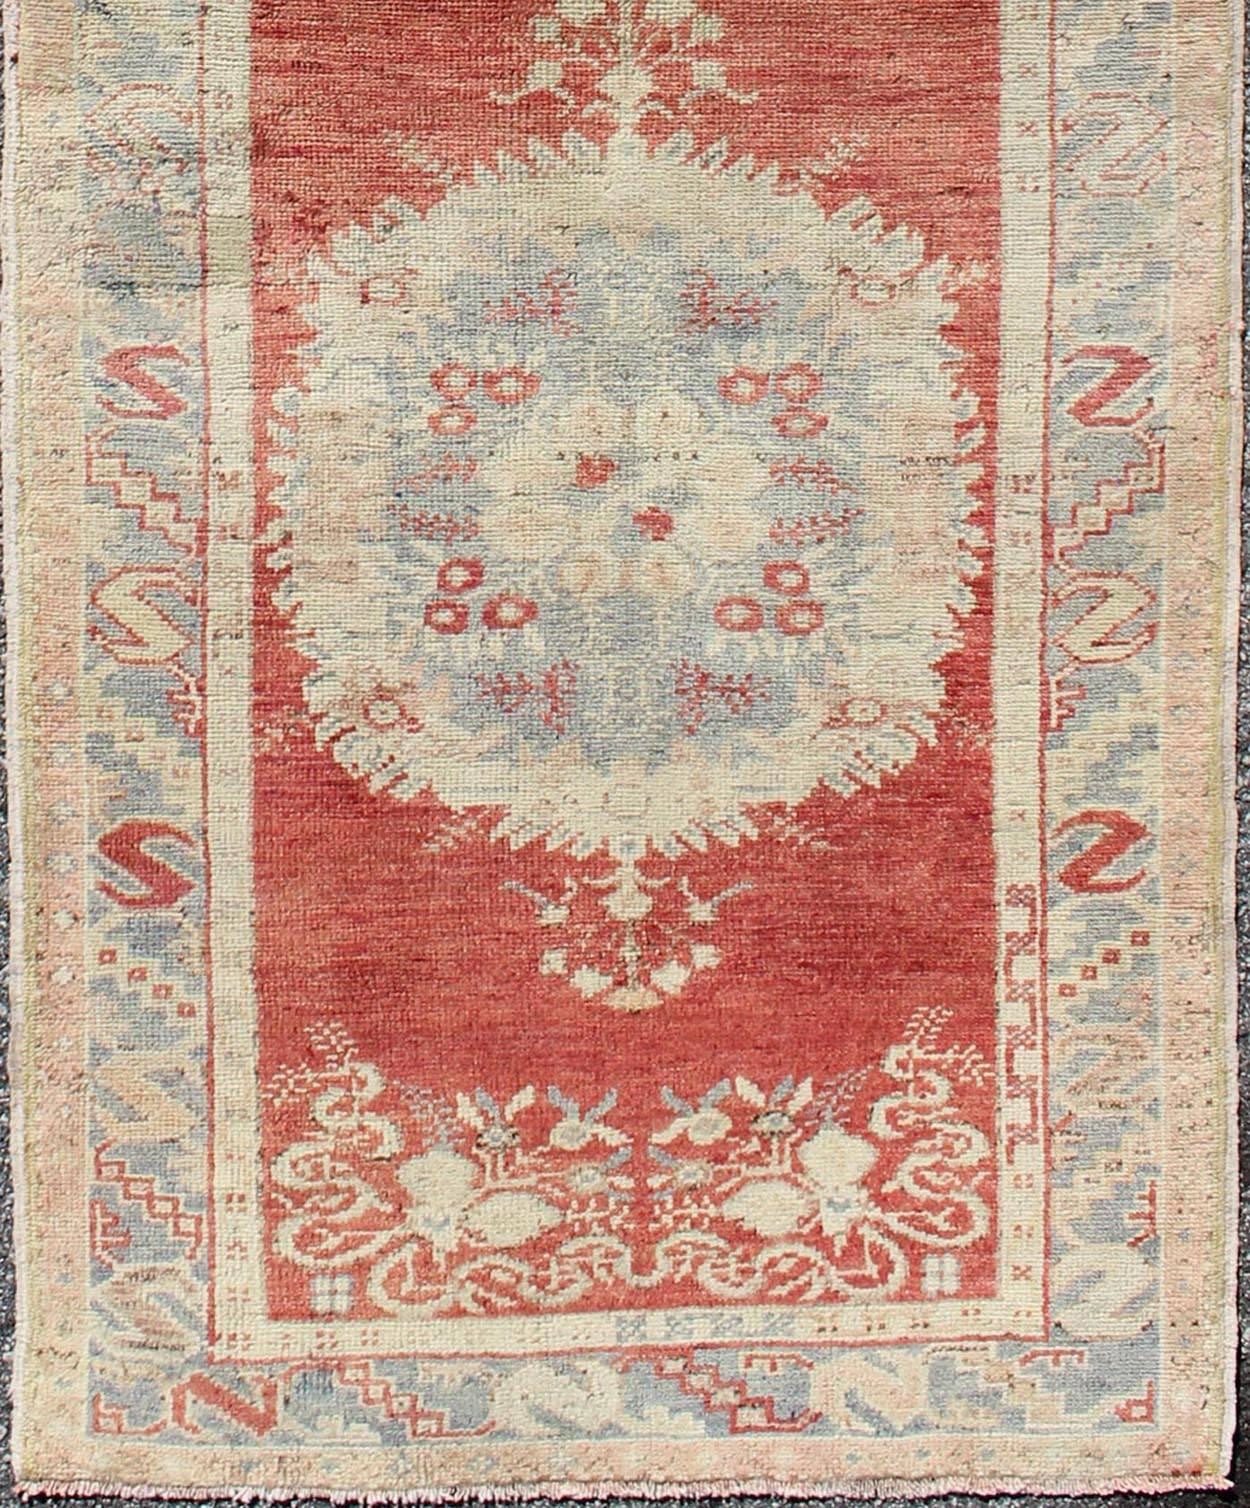 Vintage Turkish Oushak runner with three floral medallions in red, ivory, grey, rug en-328, country of origin / type: Turkey / Oushak, circa 1930

This beautiful vintage Oushak runner from 1930s Turkey features a Classic Oushak design, which is